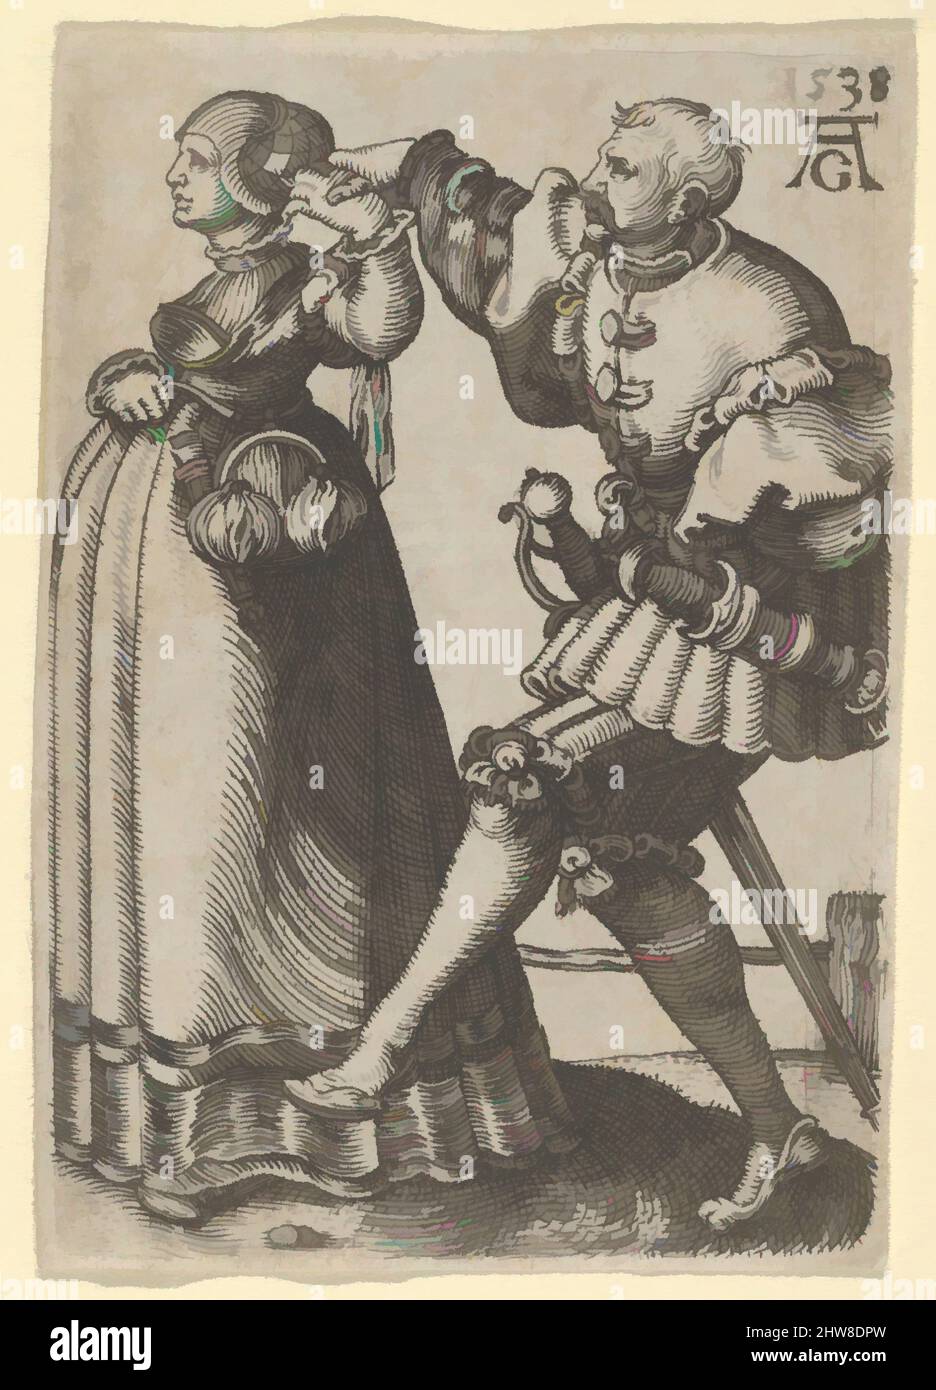 Art inspired by Dancing Couple, with the Male Figure Mid-Step, from The Small Wedding Dancers, 1538, Engraving, Sheet: 2 1/8 × 1 1/2 in. (5.4 × 3.8 cm), Prints, Heinrich Aldegrever (German, Paderborn ca. 1502–1555/1561 Soest, Classic works modernized by Artotop with a splash of modernity. Shapes, color and value, eye-catching visual impact on art. Emotions through freedom of artworks in a contemporary way. A timeless message pursuing a wildly creative new direction. Artists turning to the digital medium and creating the Artotop NFT Stock Photo